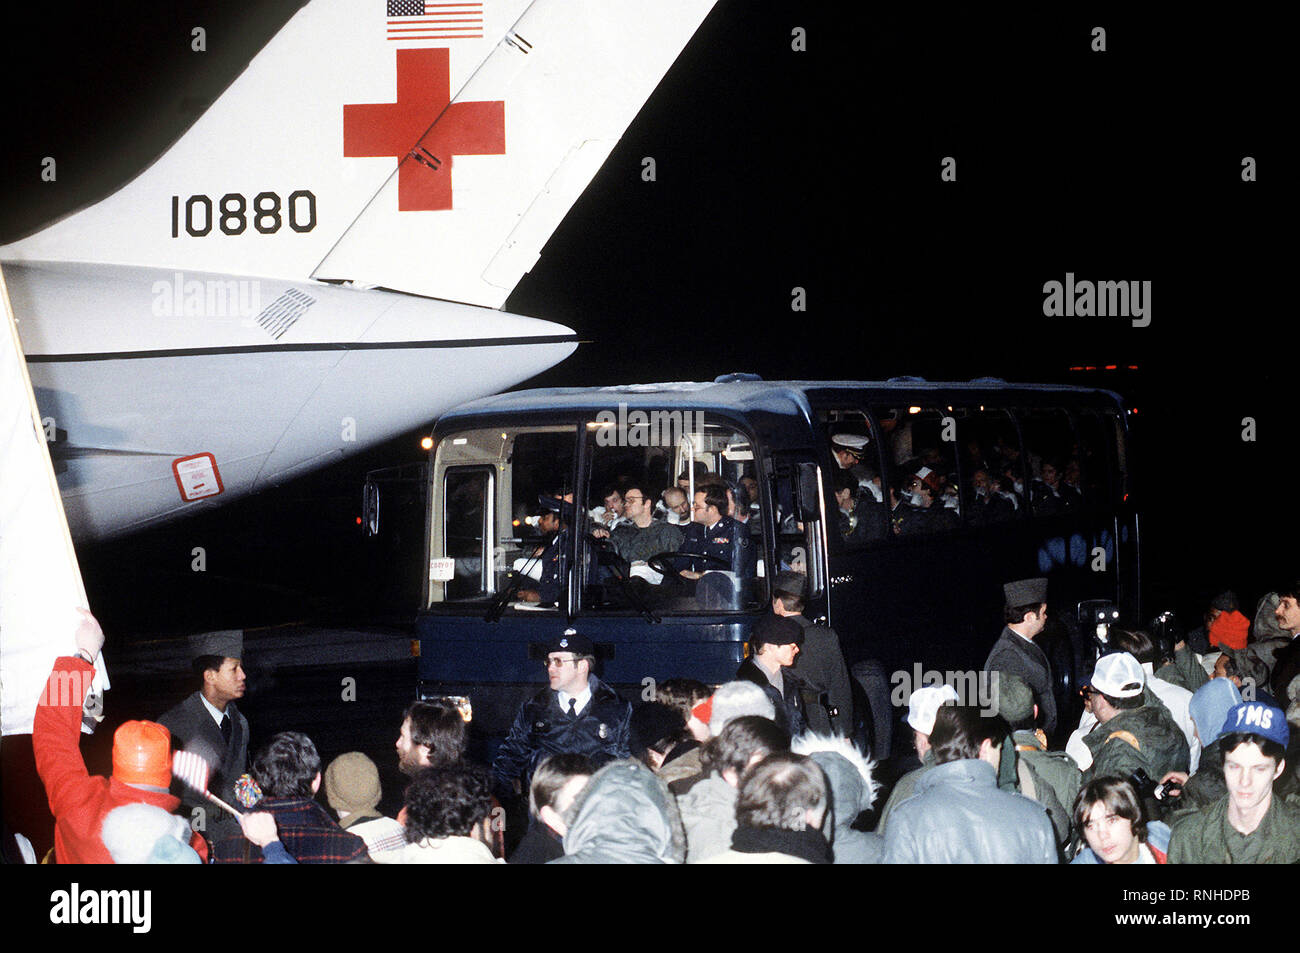 1981 - The 52 former hostages arrive at the base after their release from Iran. Stock Photo